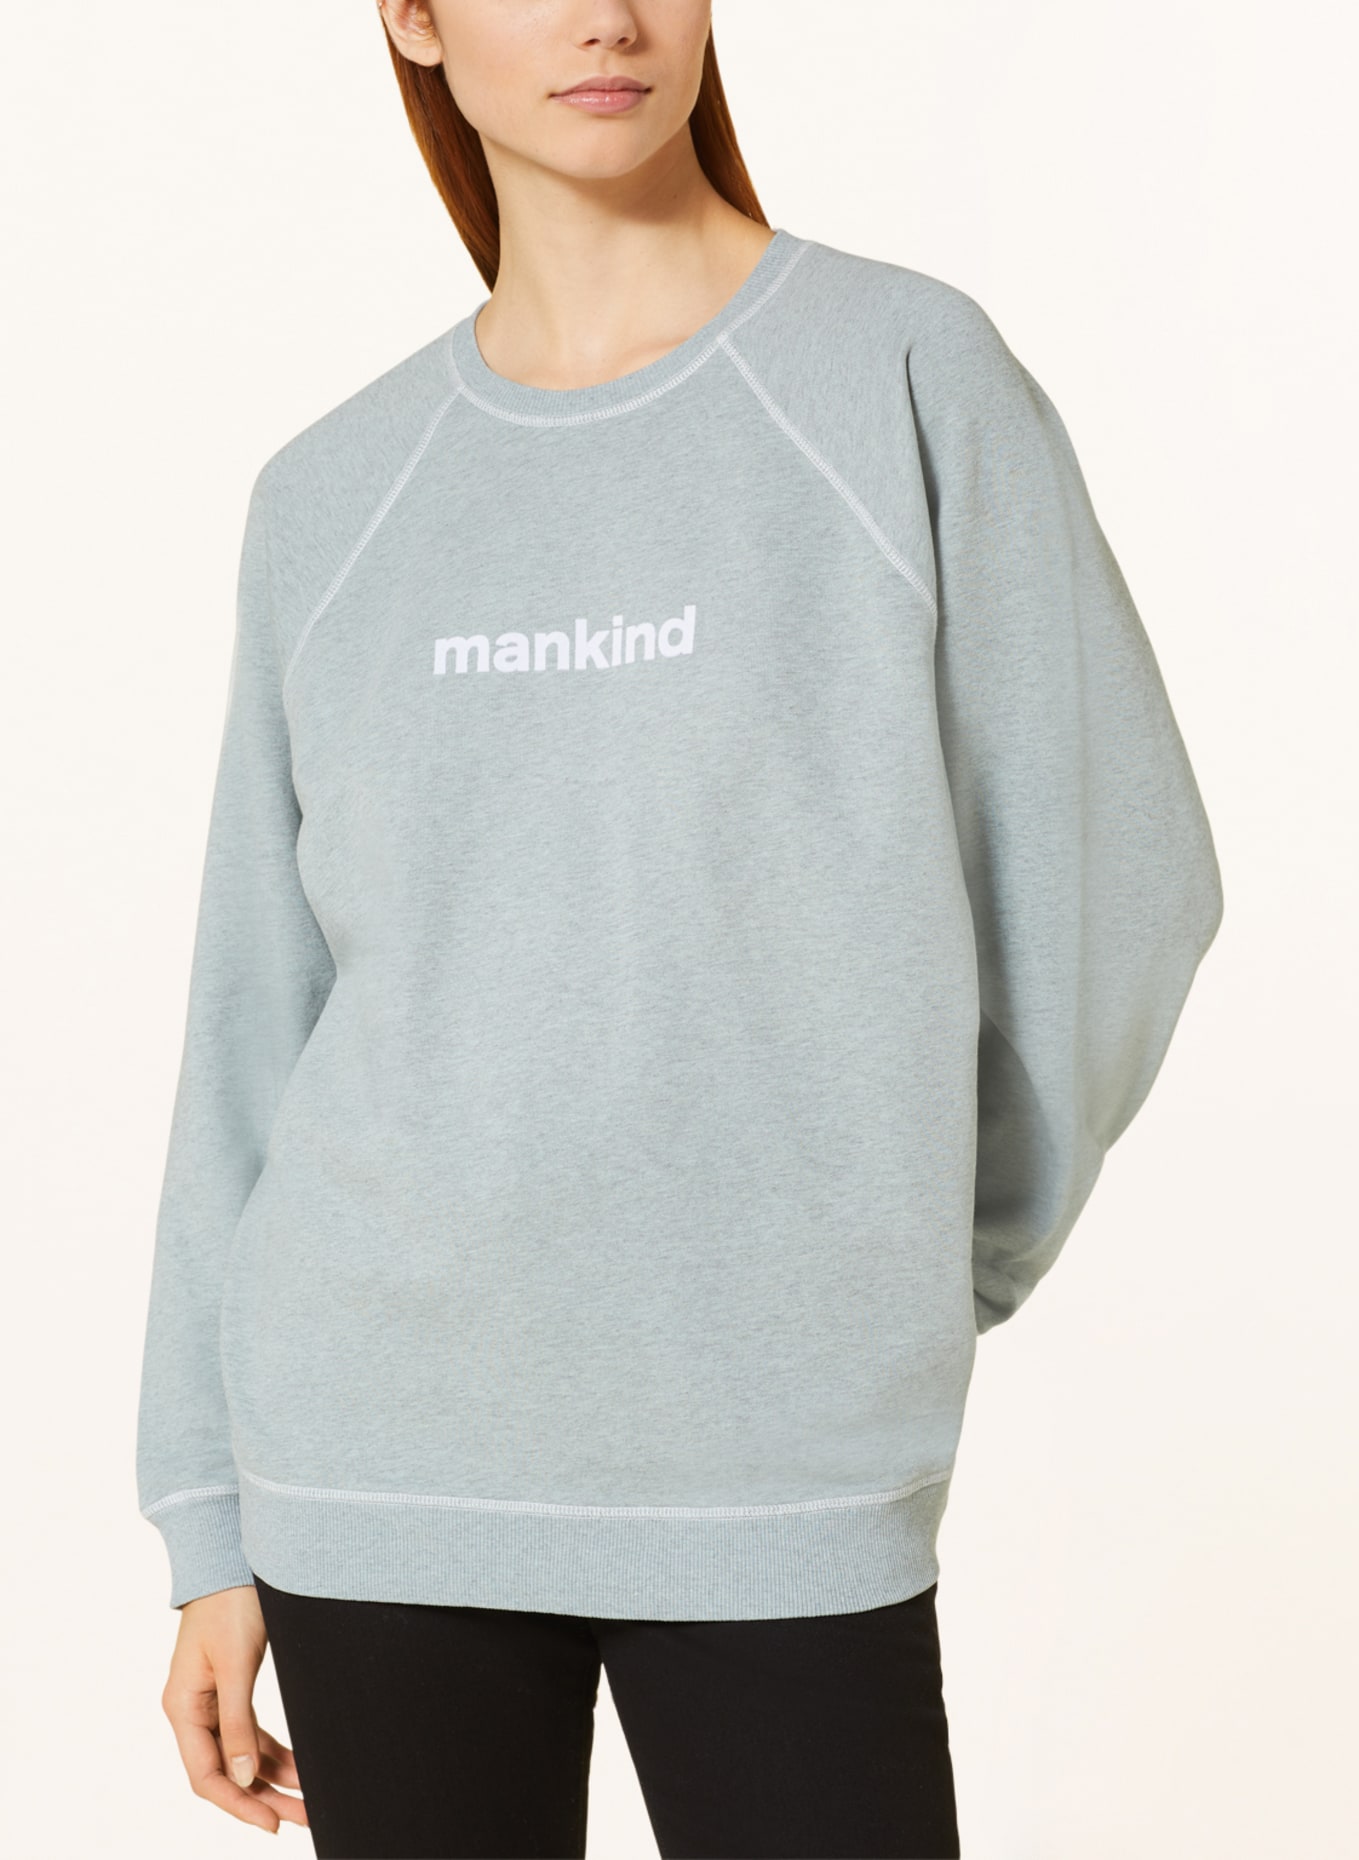 7 for all mankind Sweatshirt, Color: GRAY (Image 4)